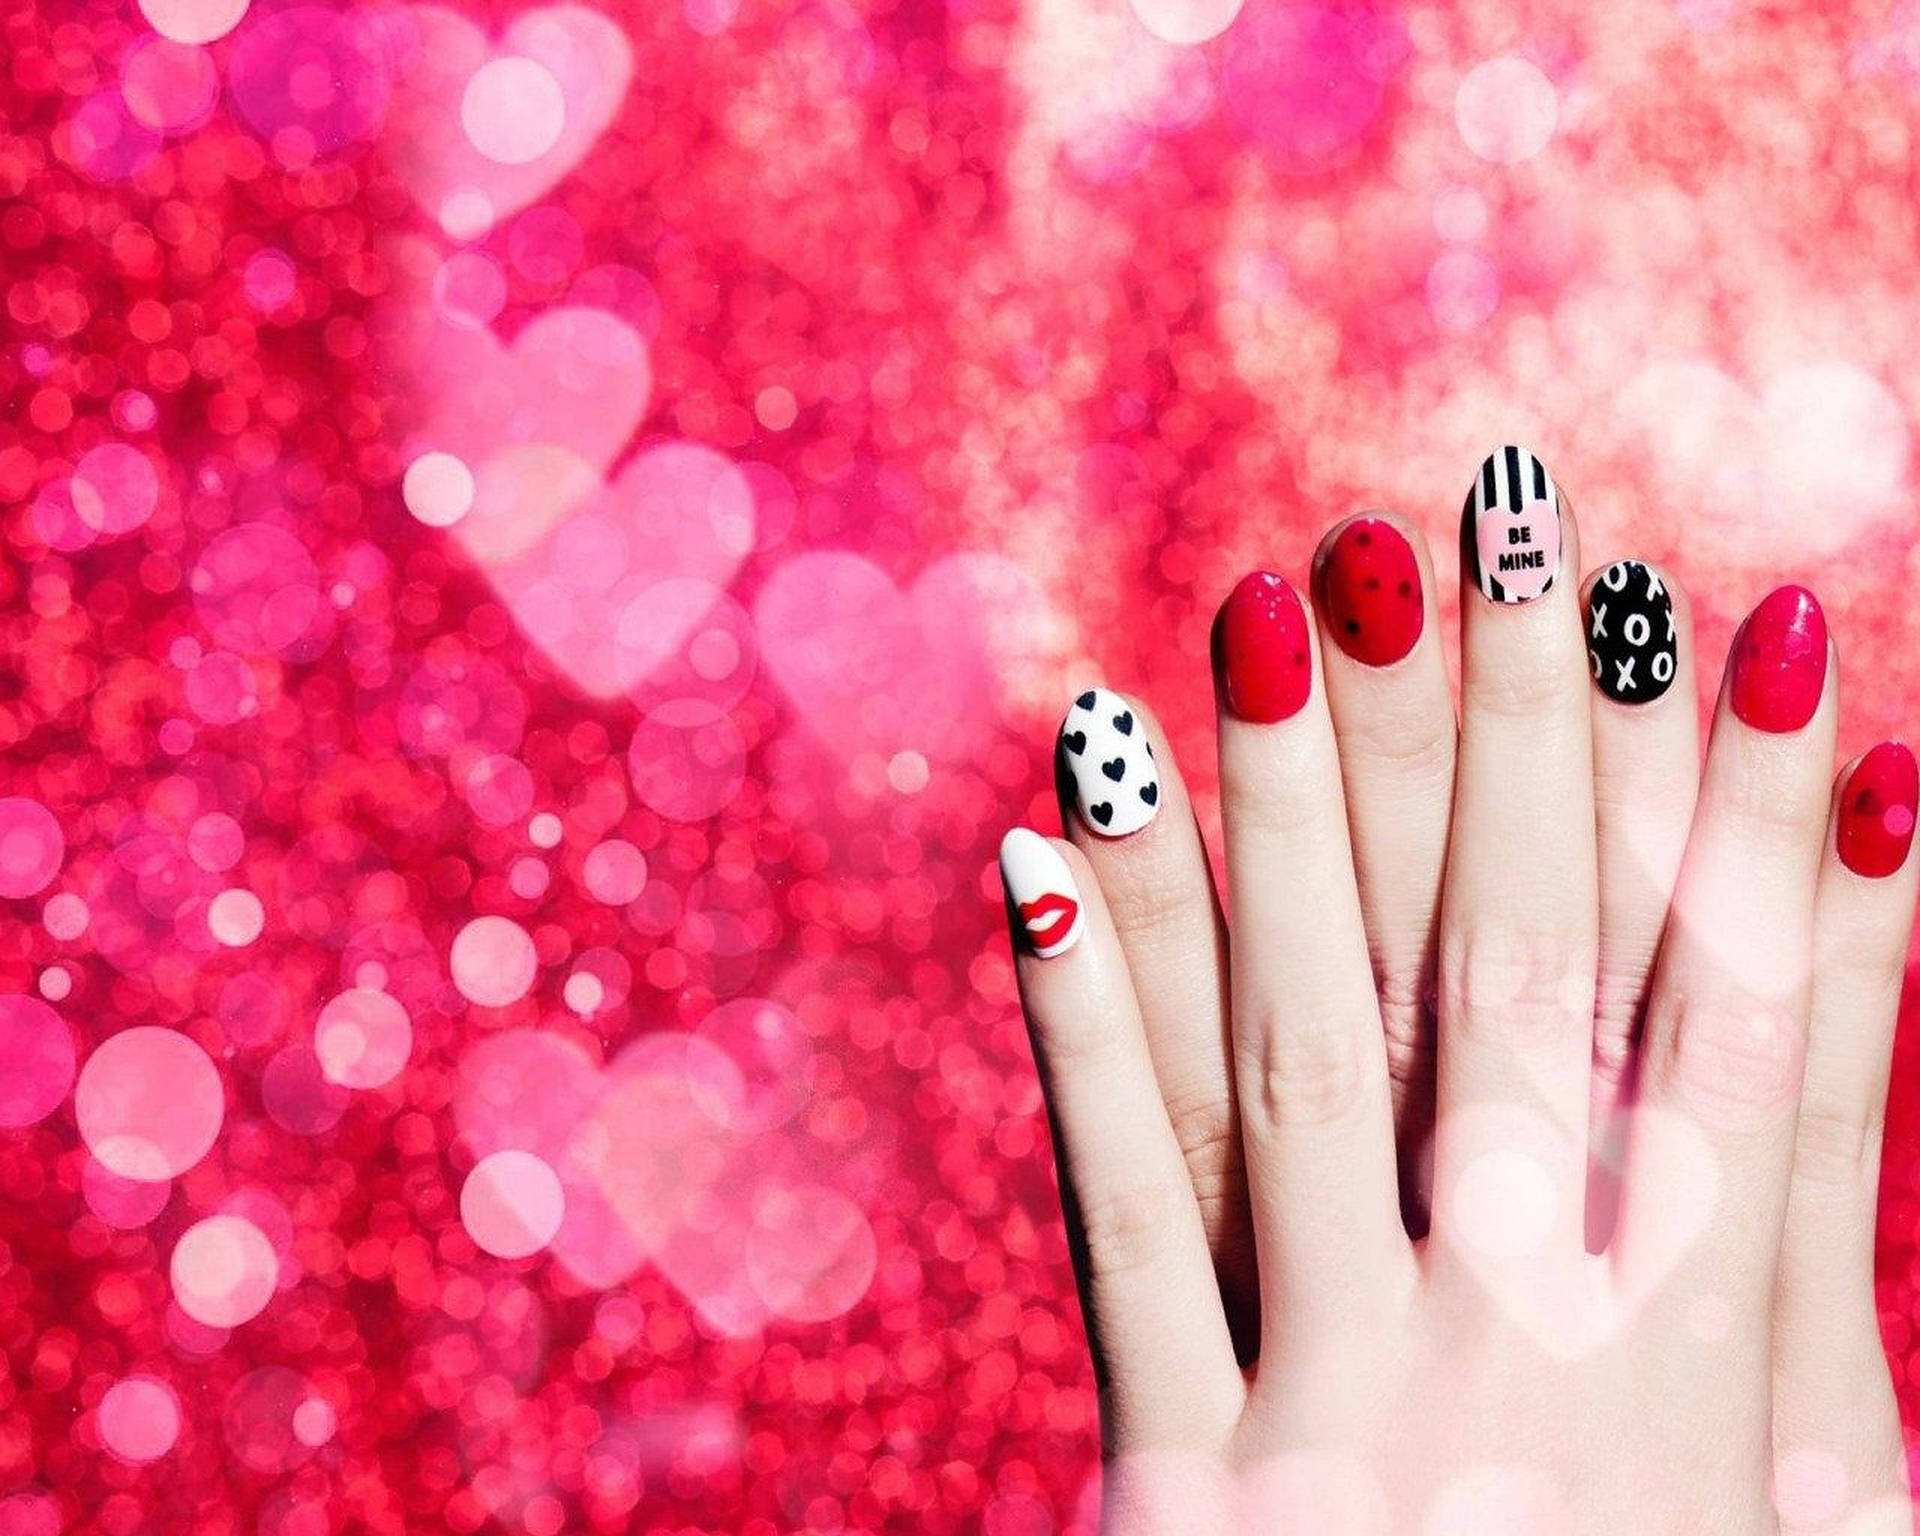 Captivating Red And Black Nail Art Design Background